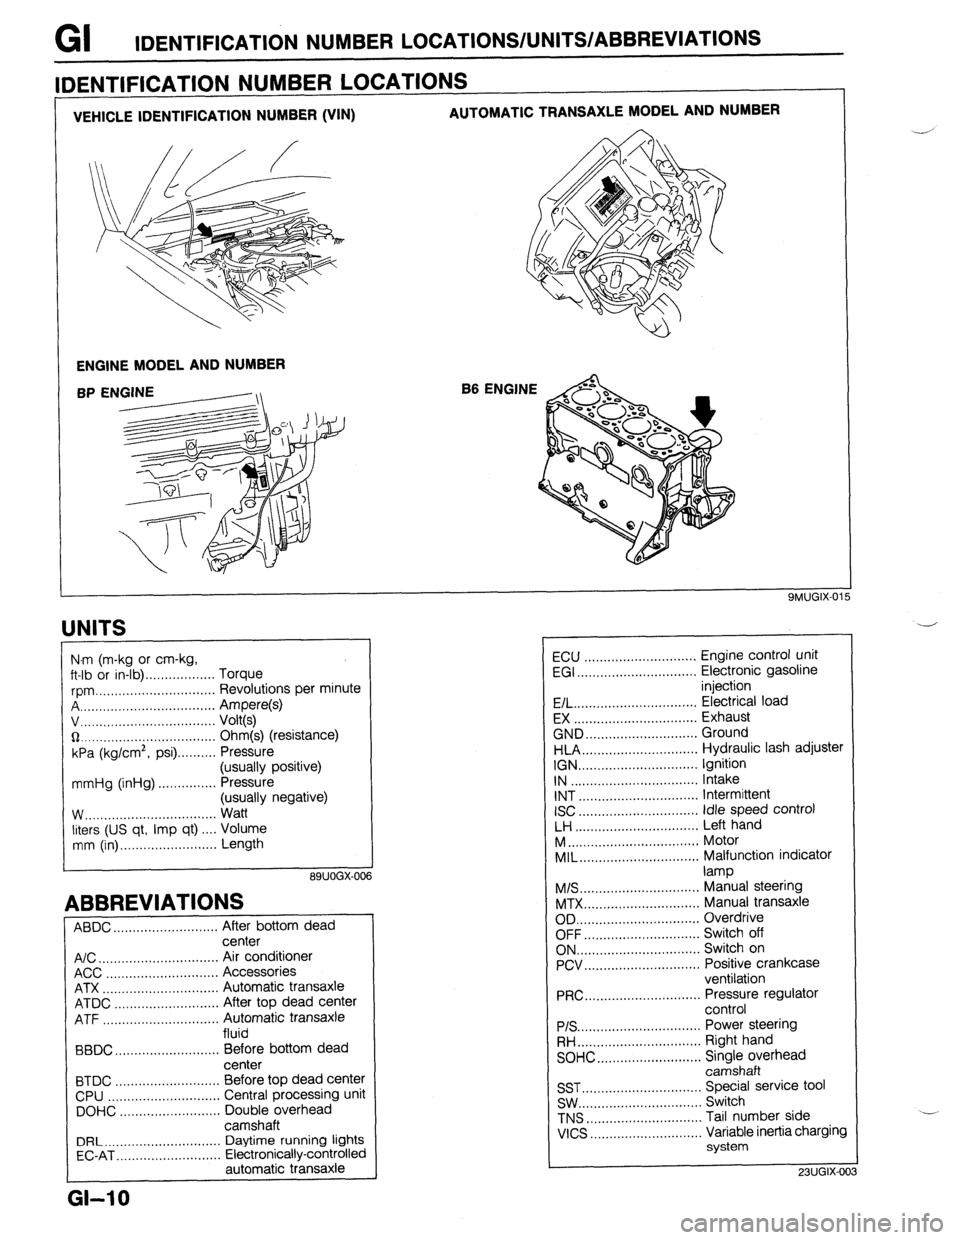 MAZDA 323 1989  Factory Repair Manual GI IDENTIFICATION NUMBER LOCATIONS/UNITS/ABBREVlATlONS 
VEHICLE IDENTIFICATION NUMBER (VIN) AUTOMATIC TRANSAXLE MODEL AND NUMBER 
ENGINE MODEL AND NUMBER 
B6 ENGINE 
IDENTIFICATION NUMBER LOCATIONS 
U